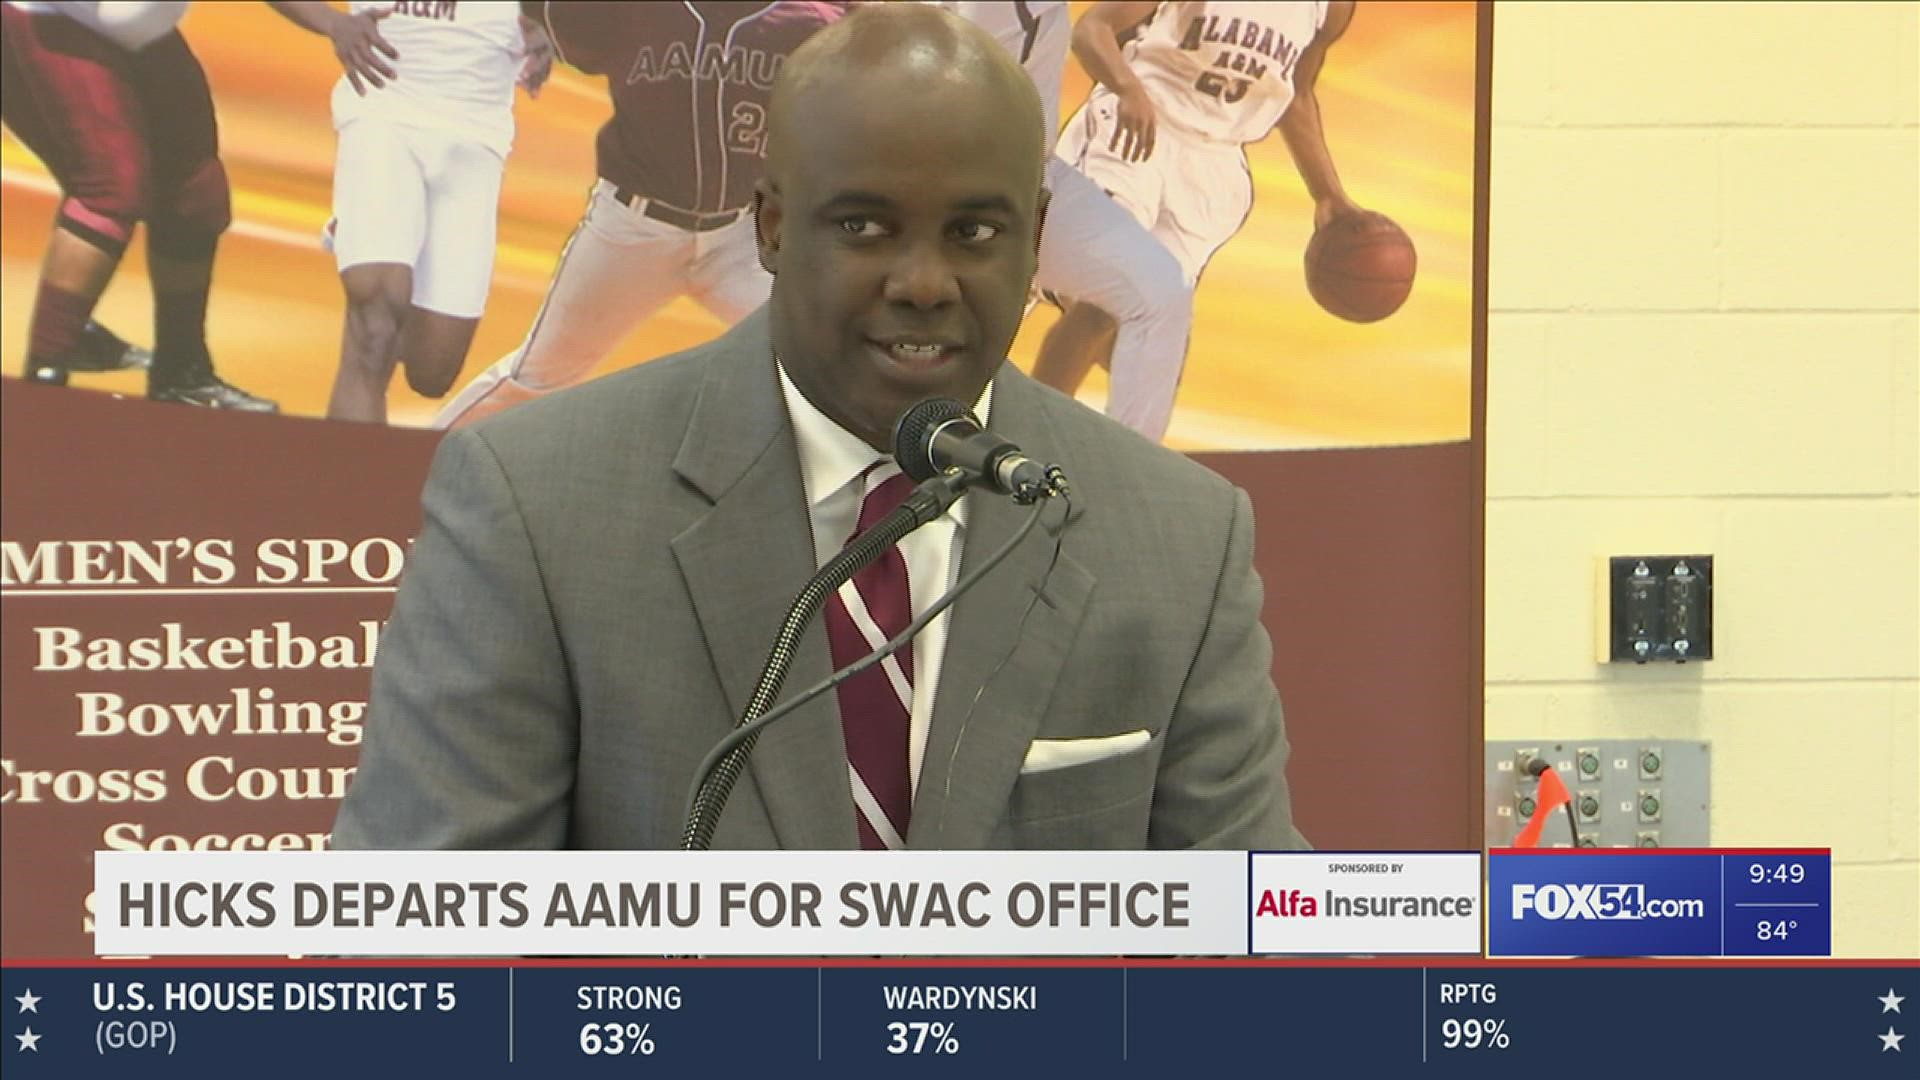 Alabama A&M Director of Athletics Bryan Hicks steps down to take leadership role at SWAC office